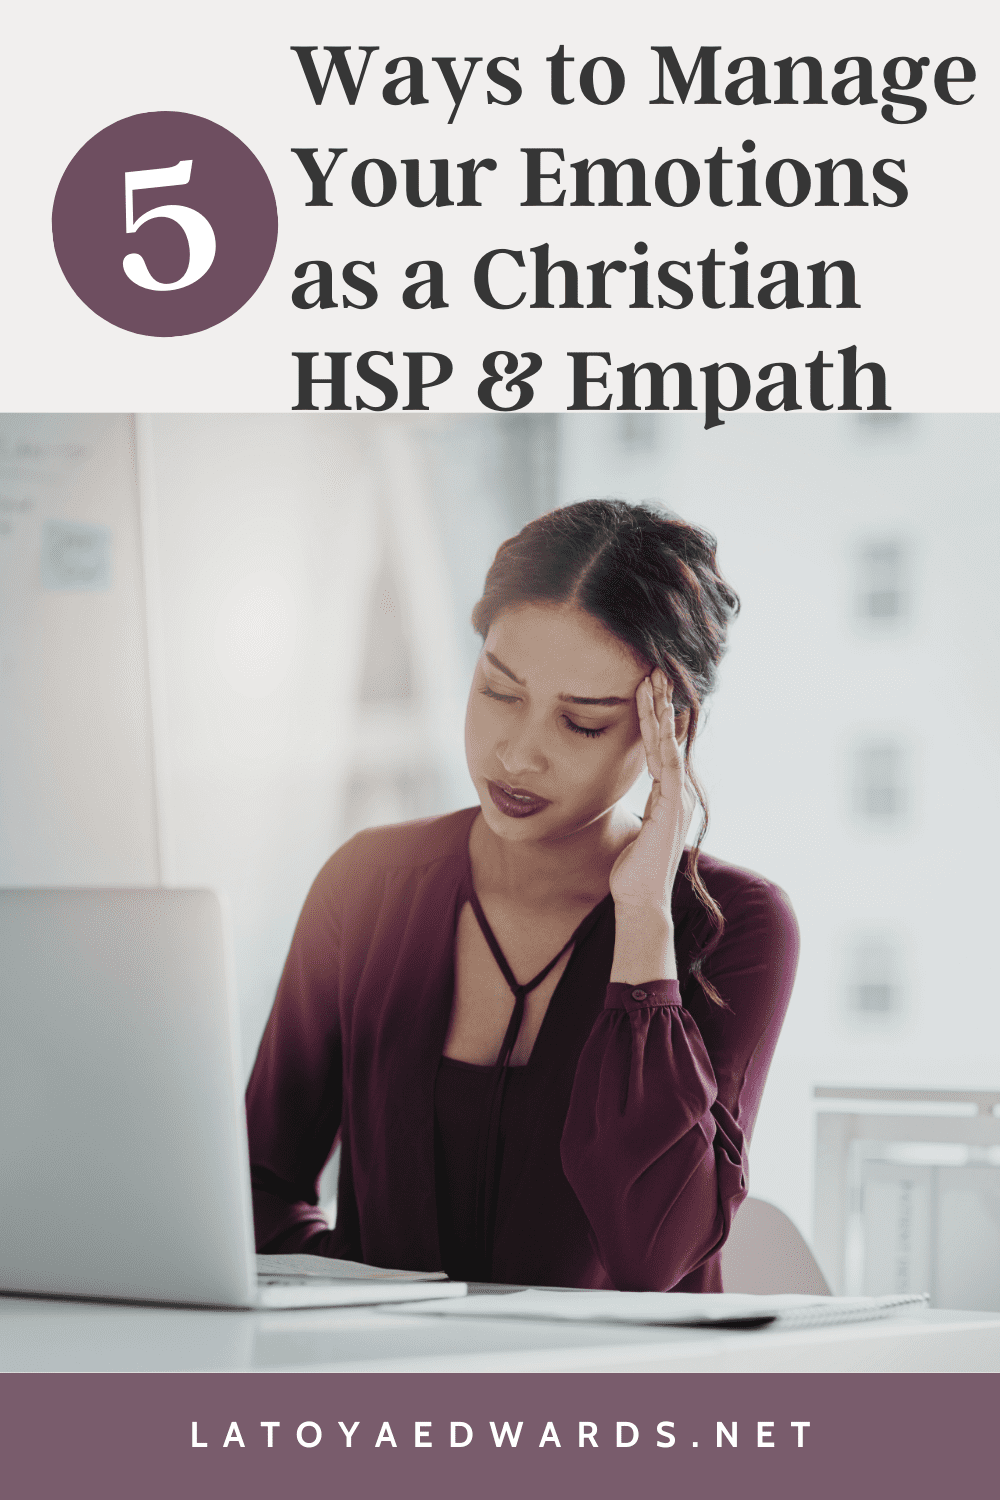 Do you know how to manage your emotions as a highly sensitive introverted Christian woman? Learn these five ways to cope with life so you can continue to pray for others and show up for life when you feel overwhelmed as a Christian empath.